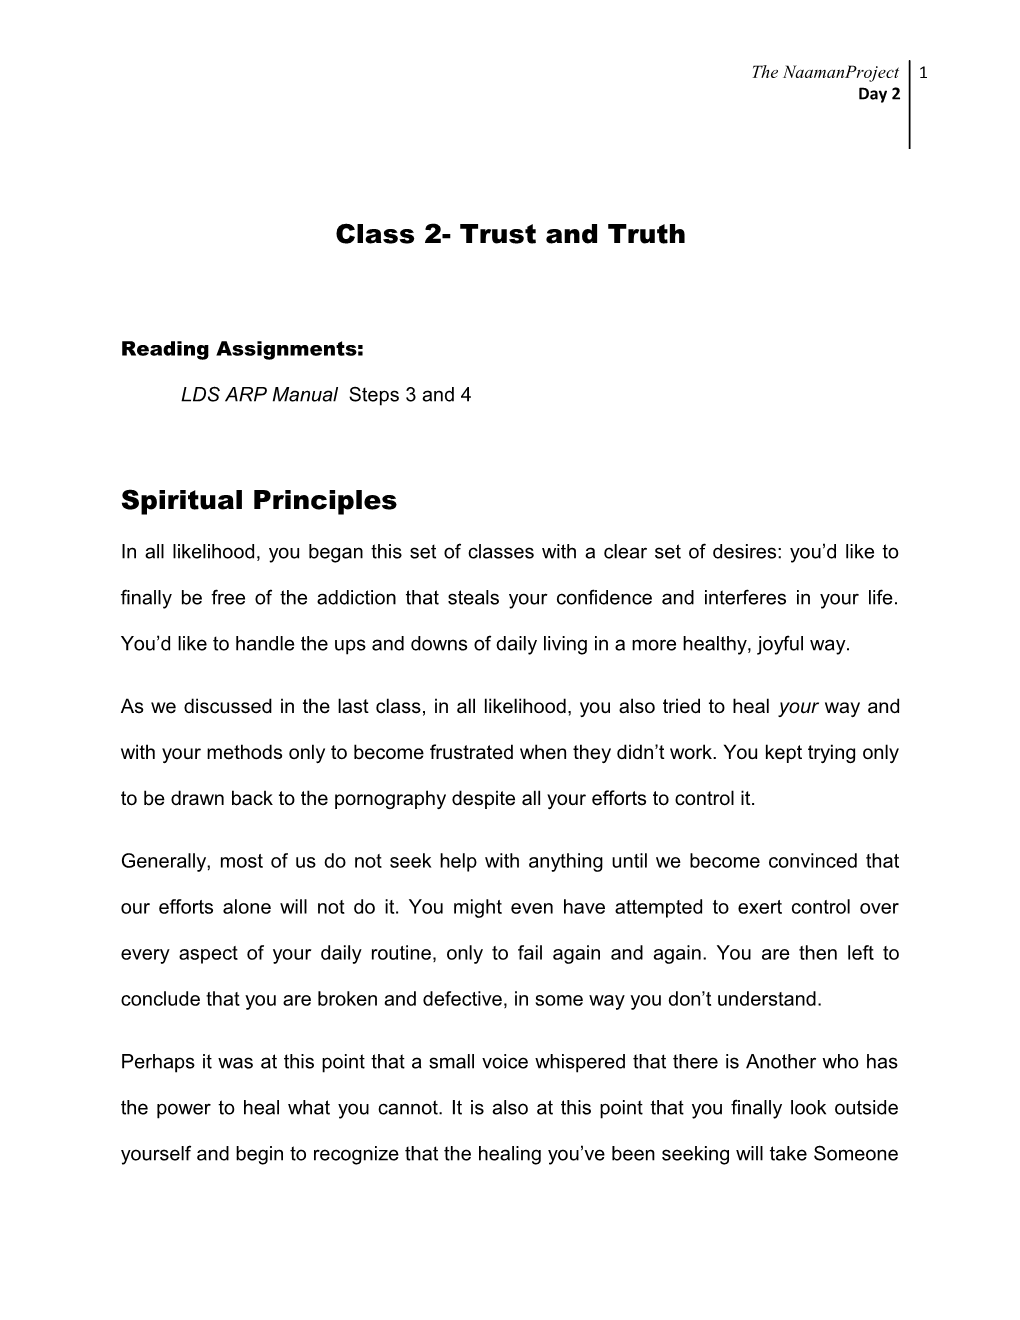 Class 2- Trust and Truth